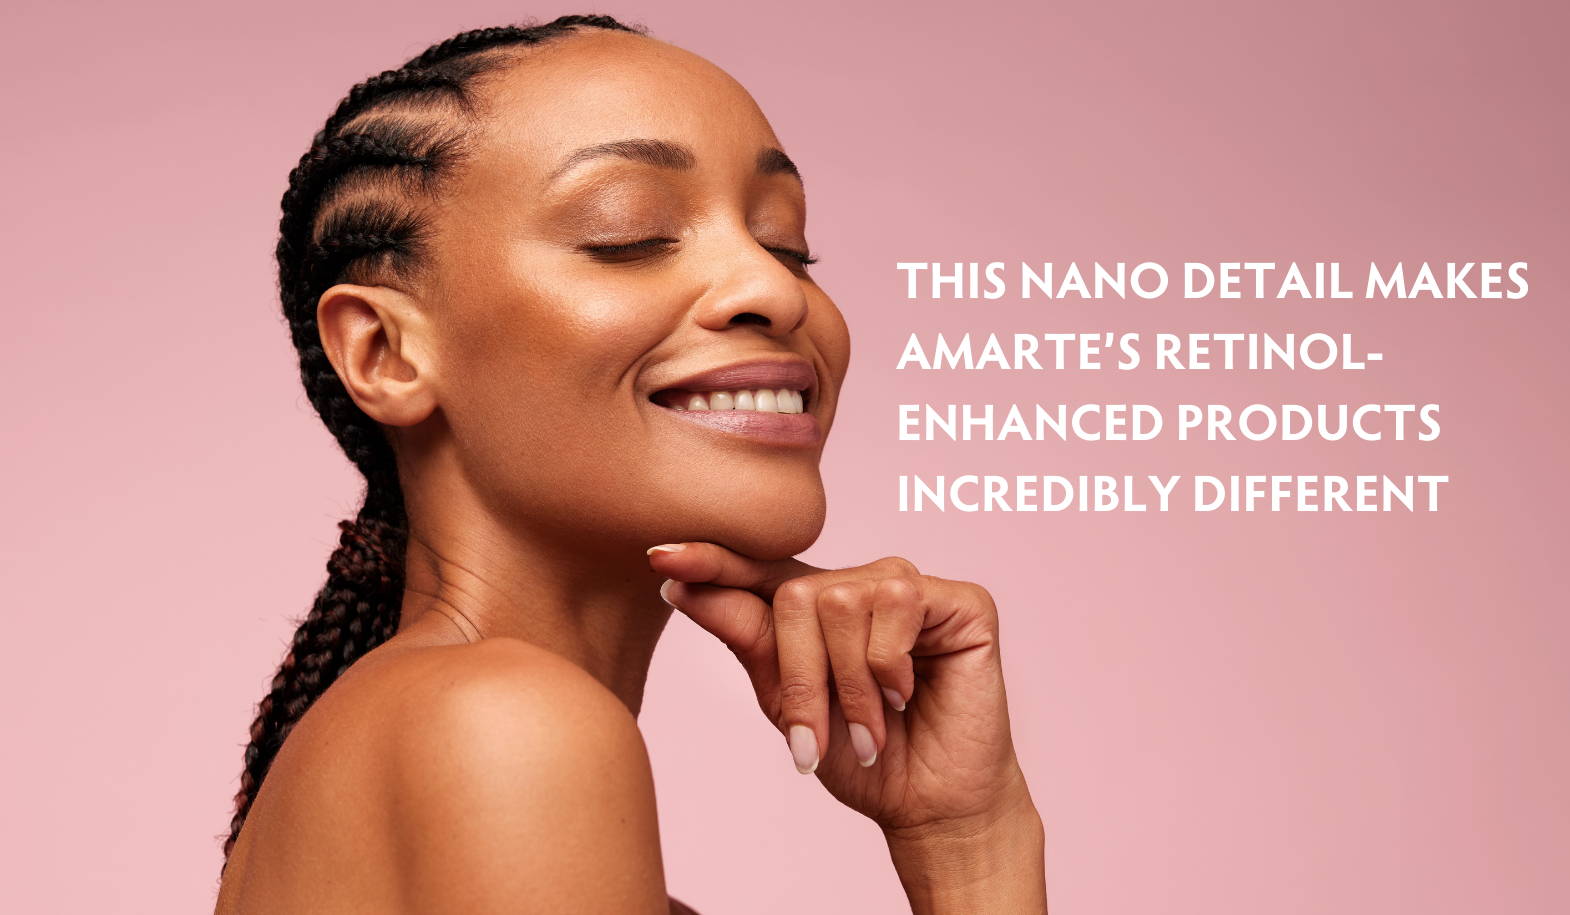 Learn About This Nano-Detail That Makes Amarte’s Retinol-Enhanced Products Incredibly Different